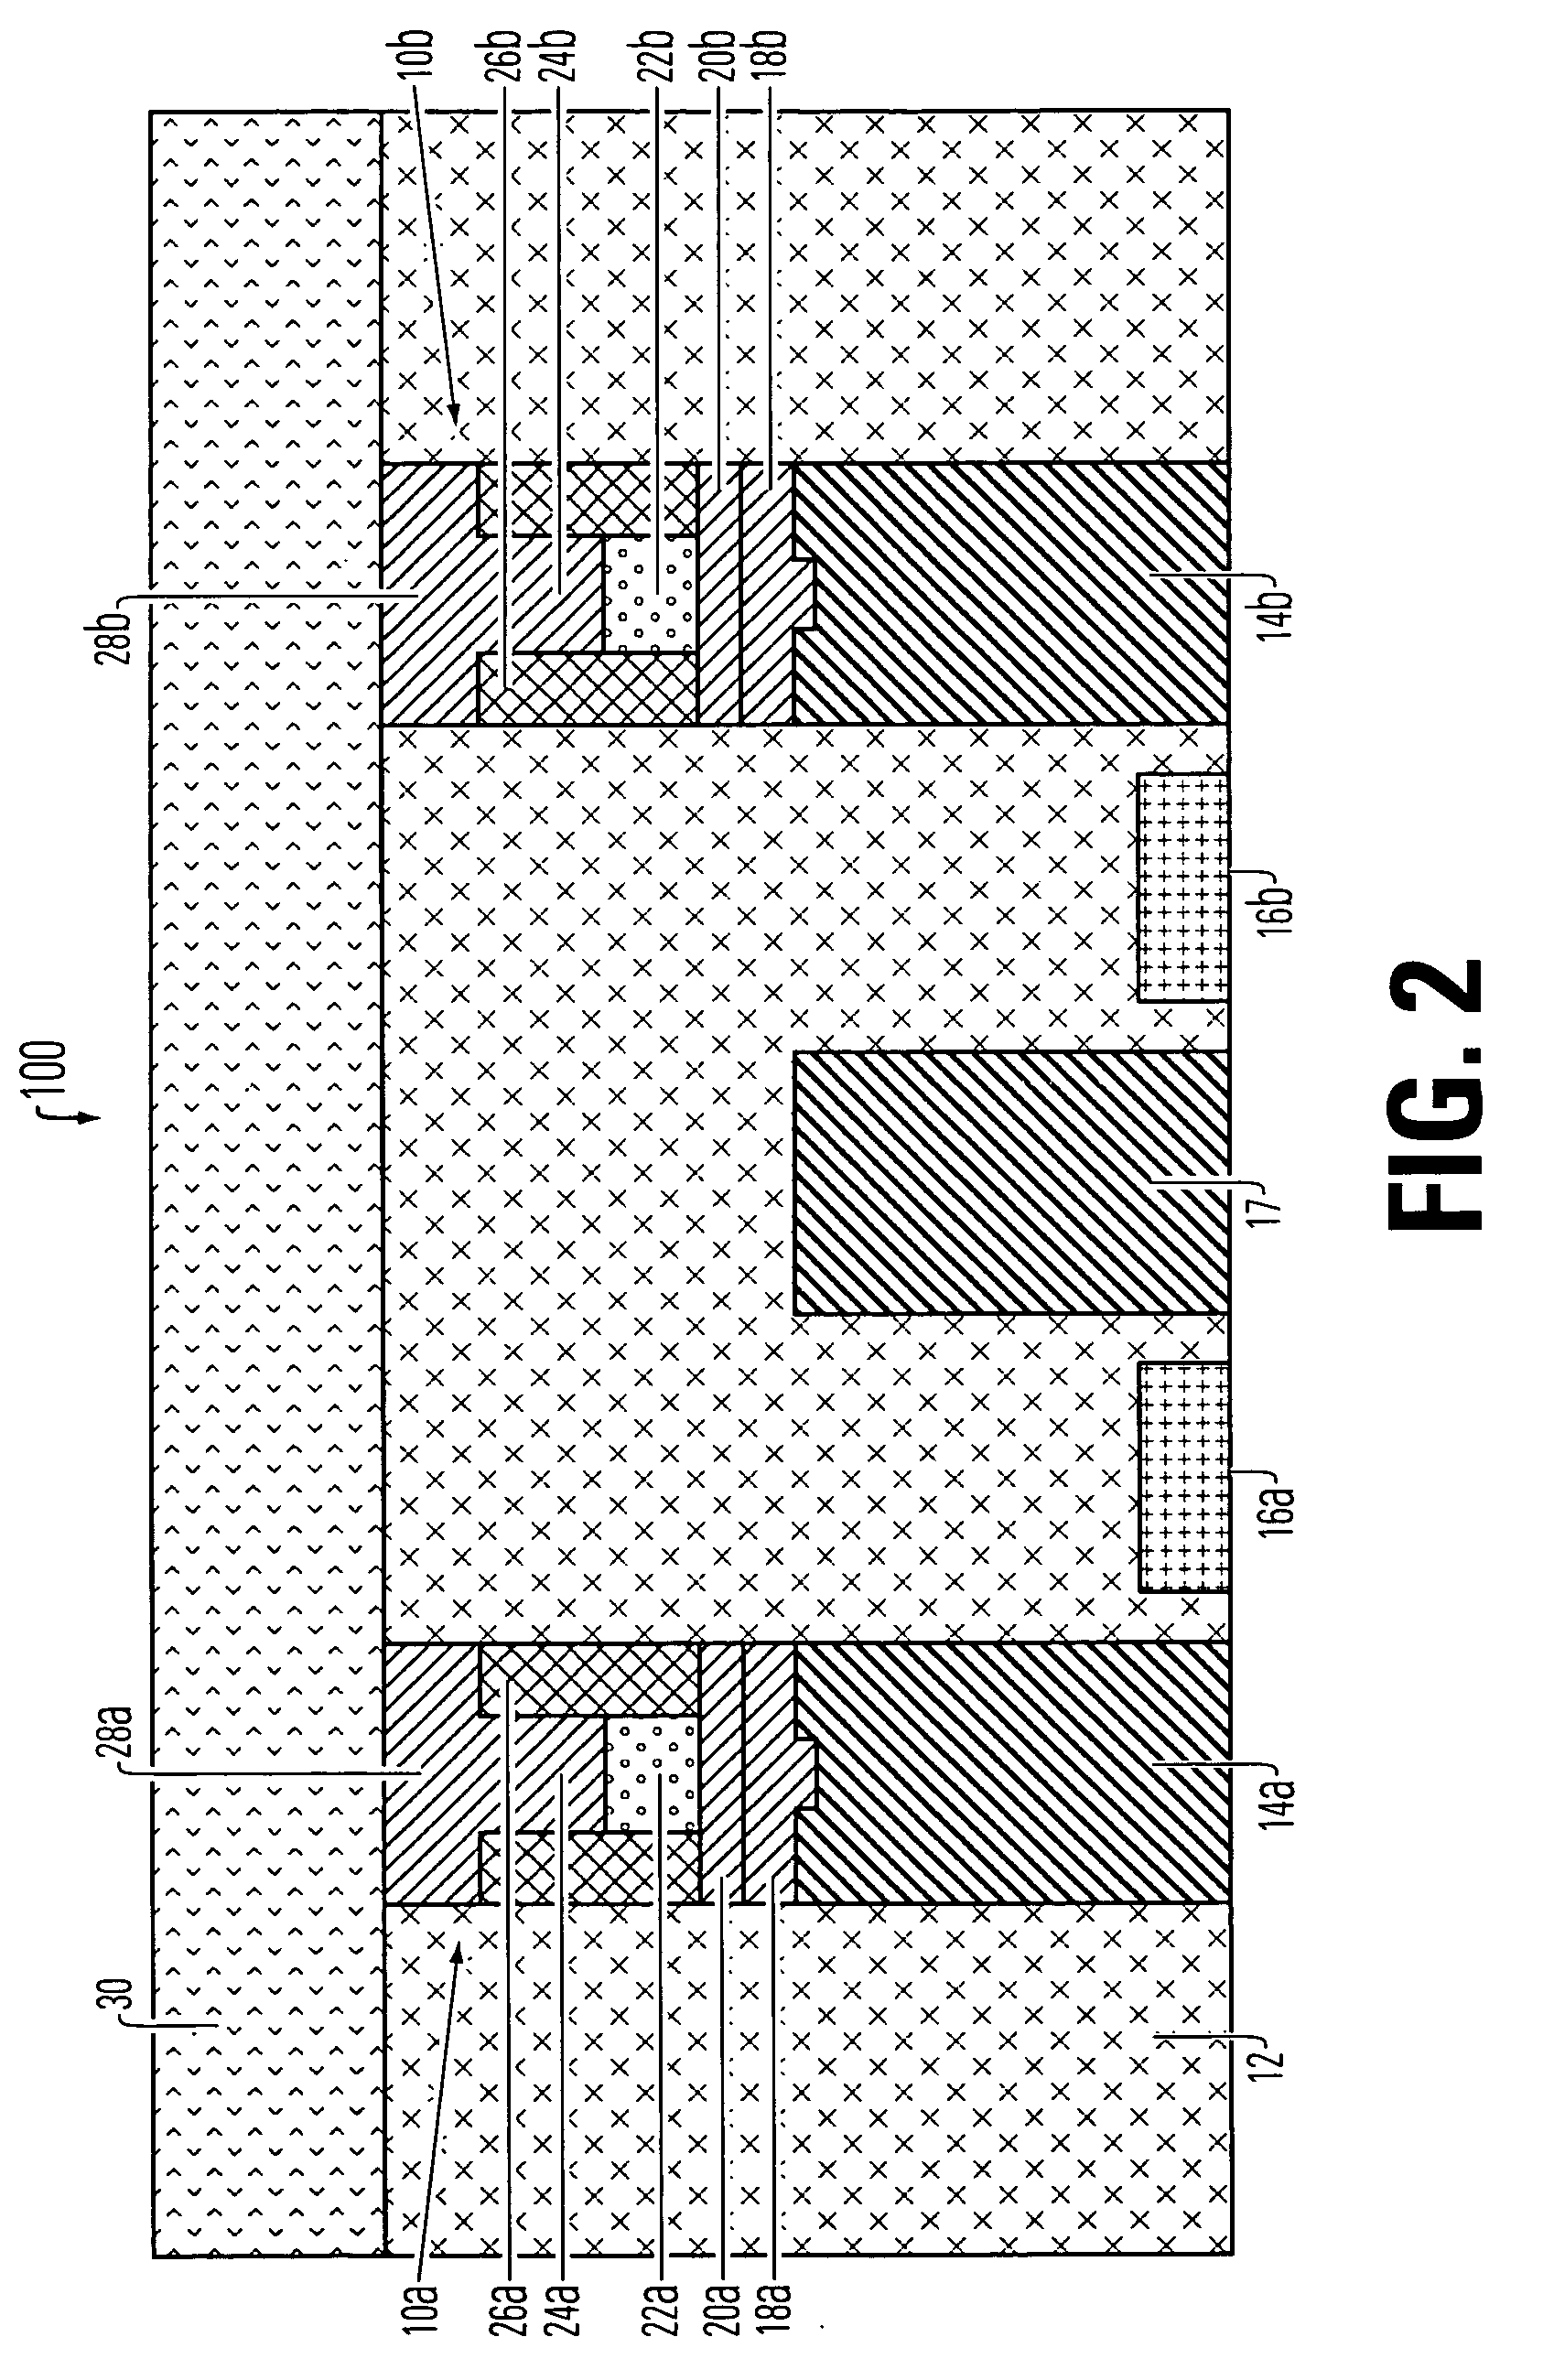 Thermally contained/insulated phase change memory device and method (combined)